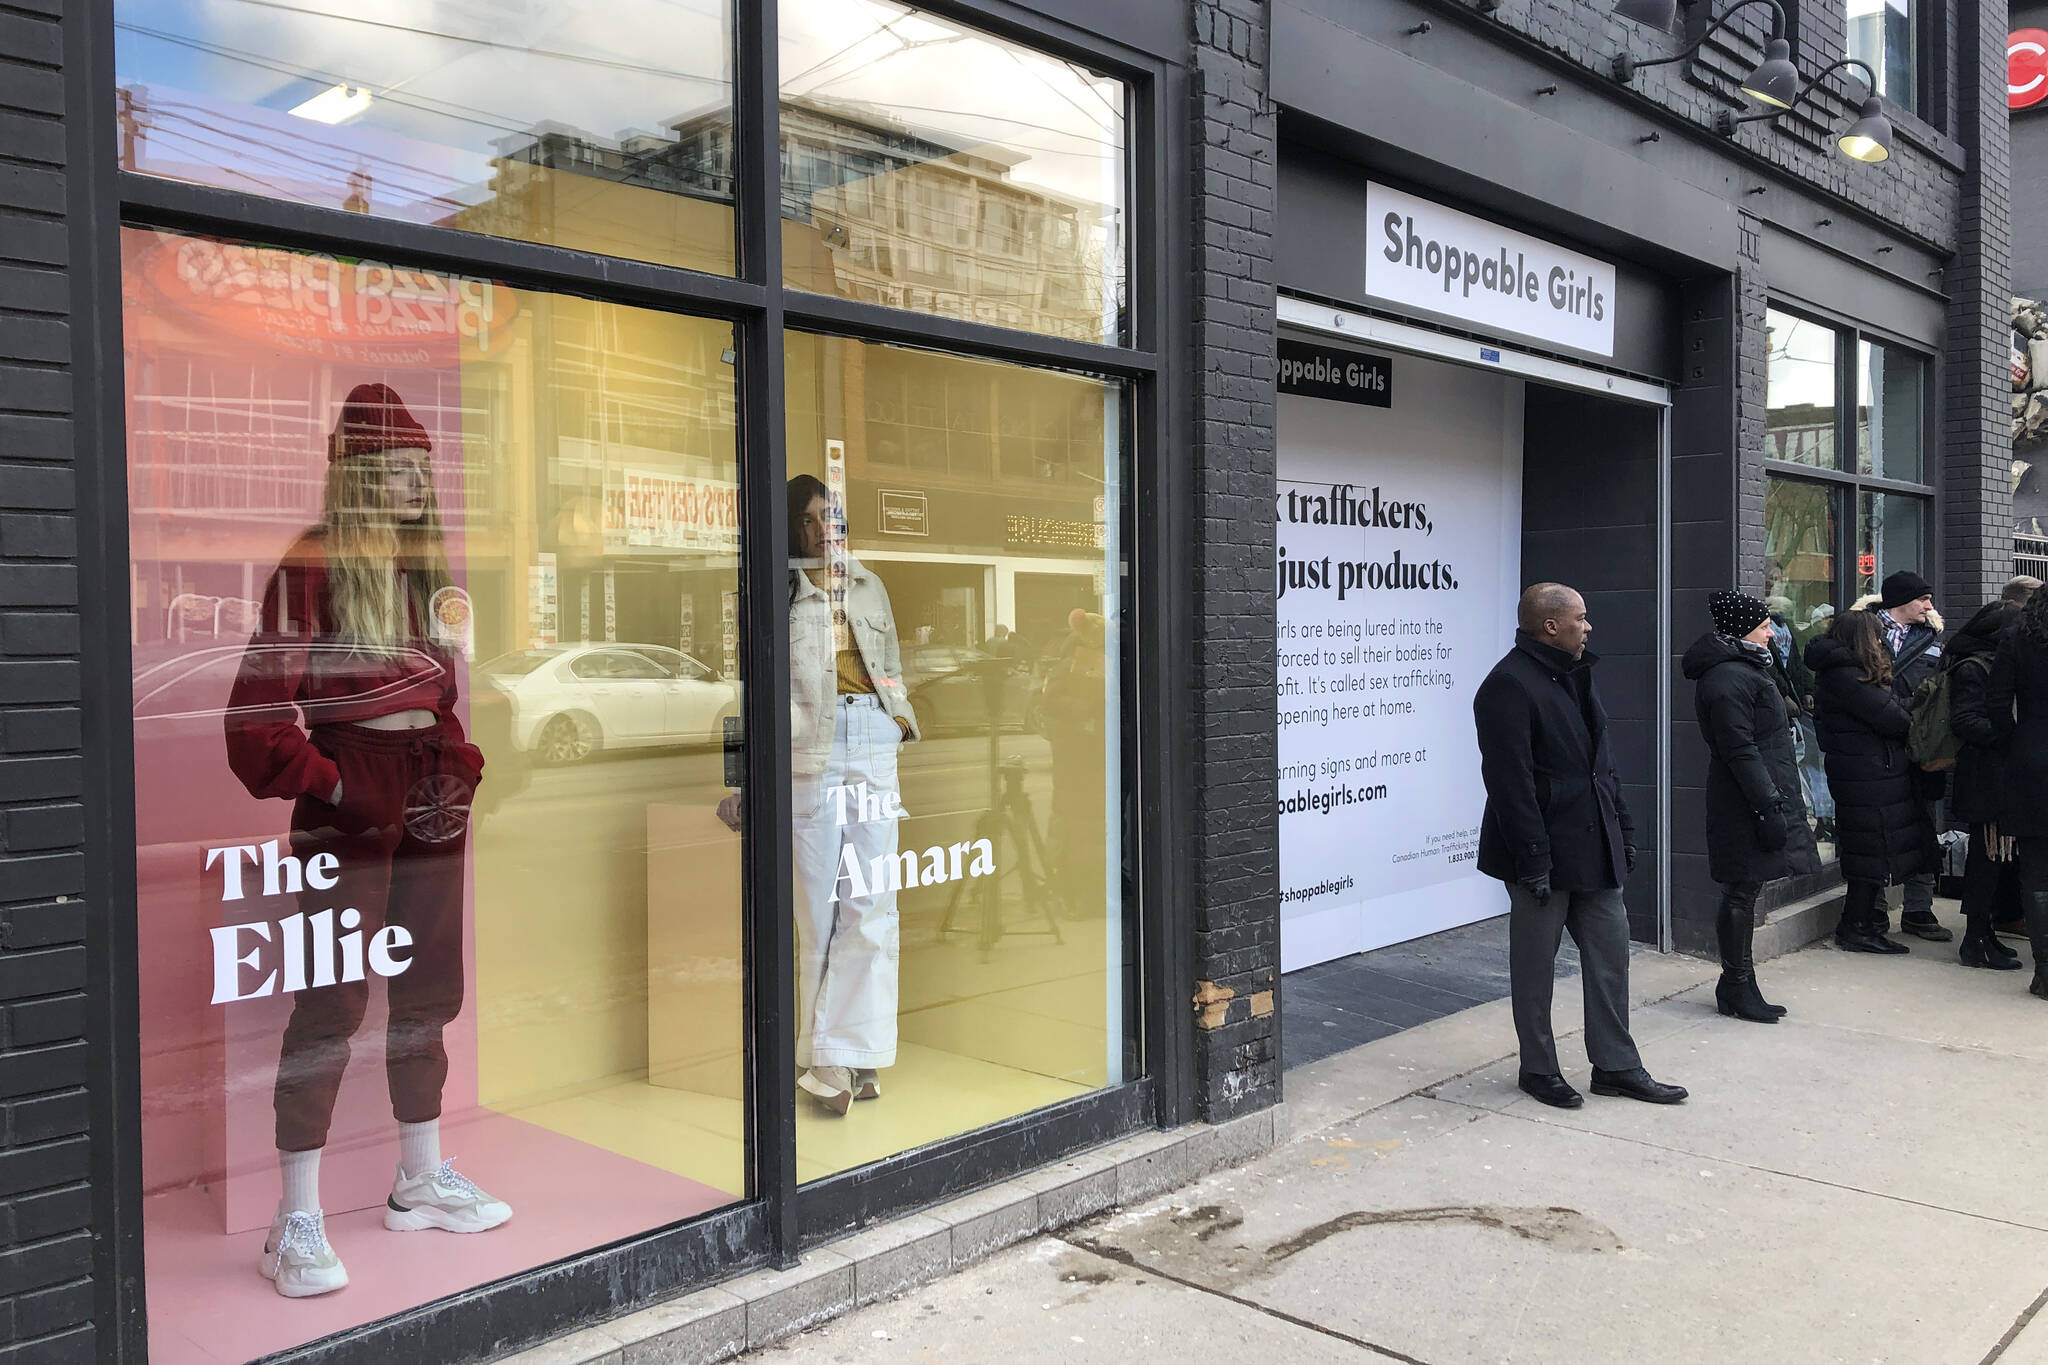 Teen Girls For Sale In Toronto Storefront To Raise Awareness Of Sex Trafficking